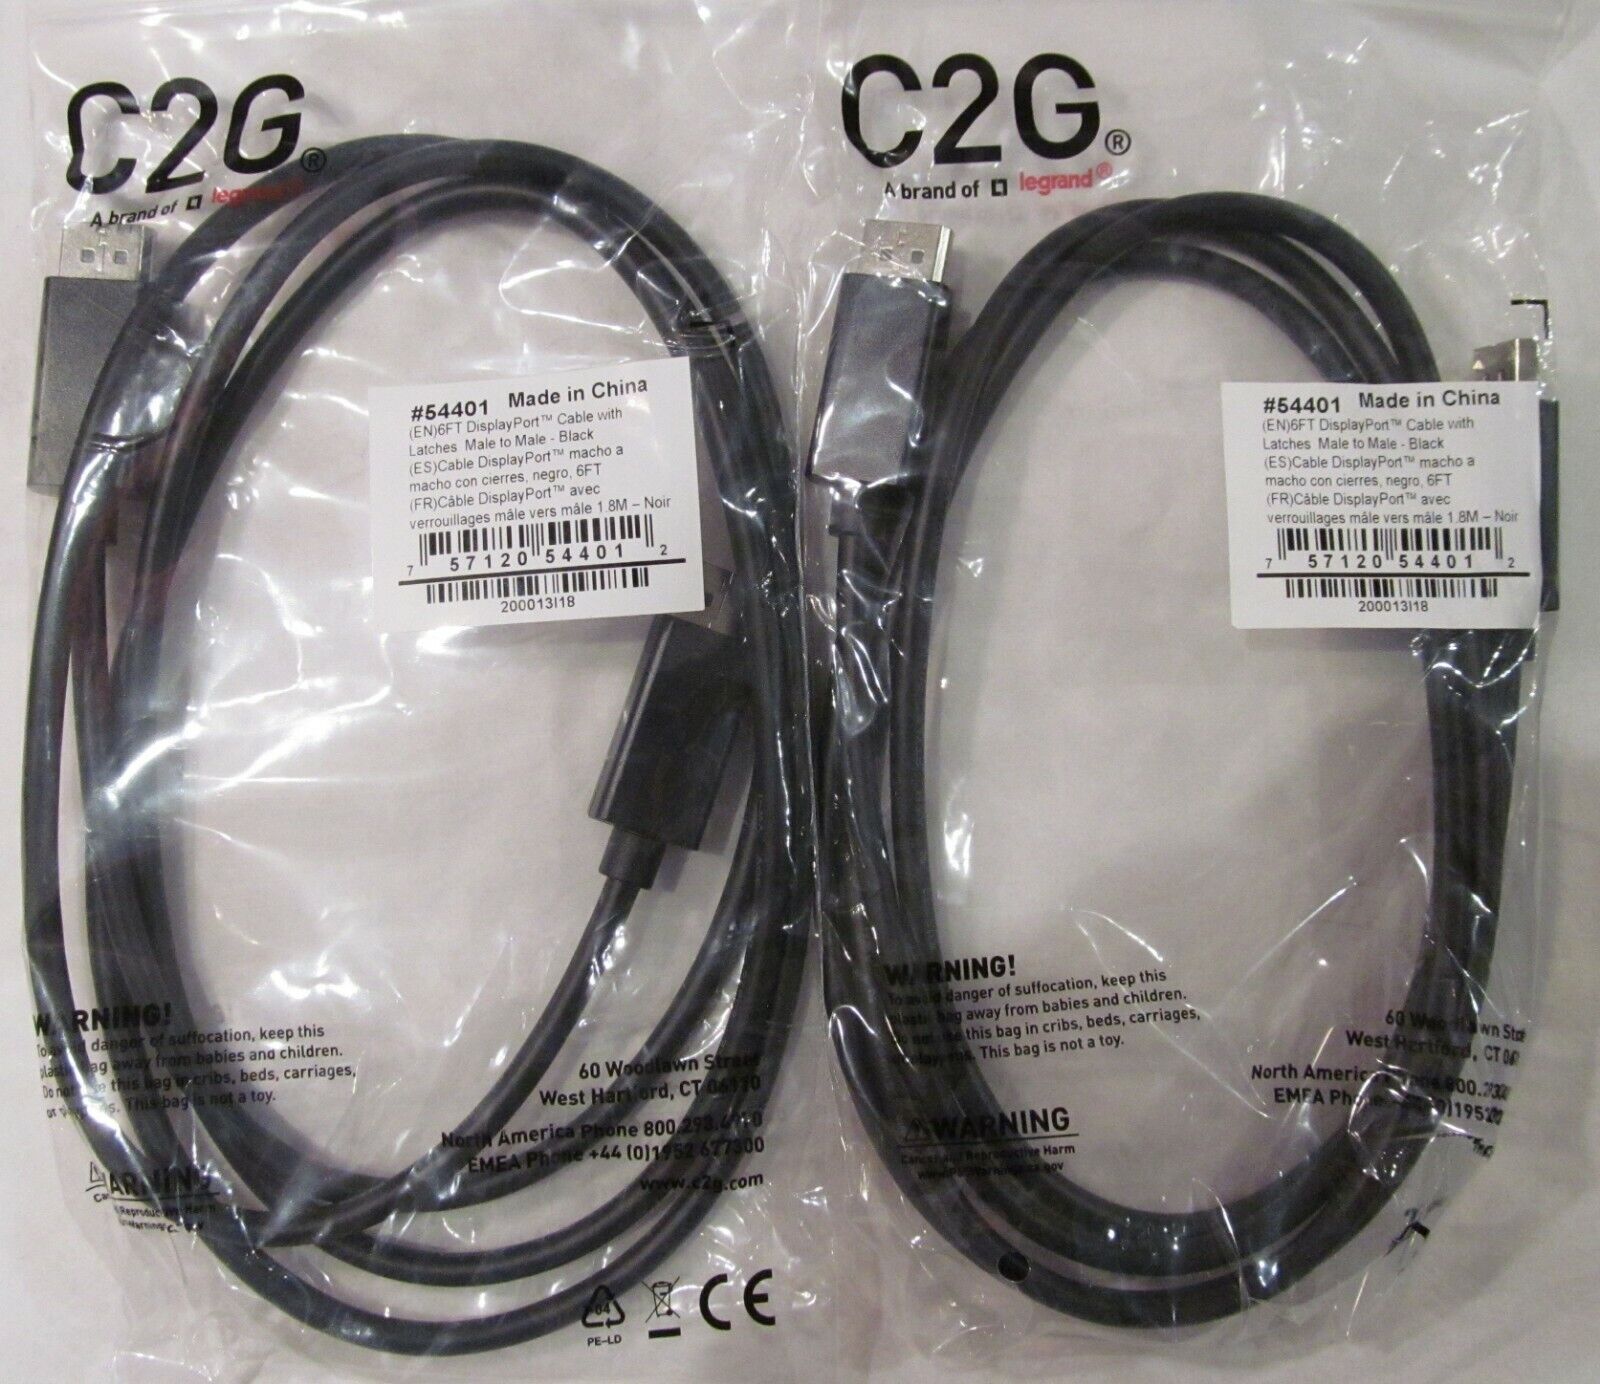 2-PACK LEGRAND C2G 54401 6ft DISPLAYPORT VIDEO MONITOR CABLE W/LATCHES MALE-MALE